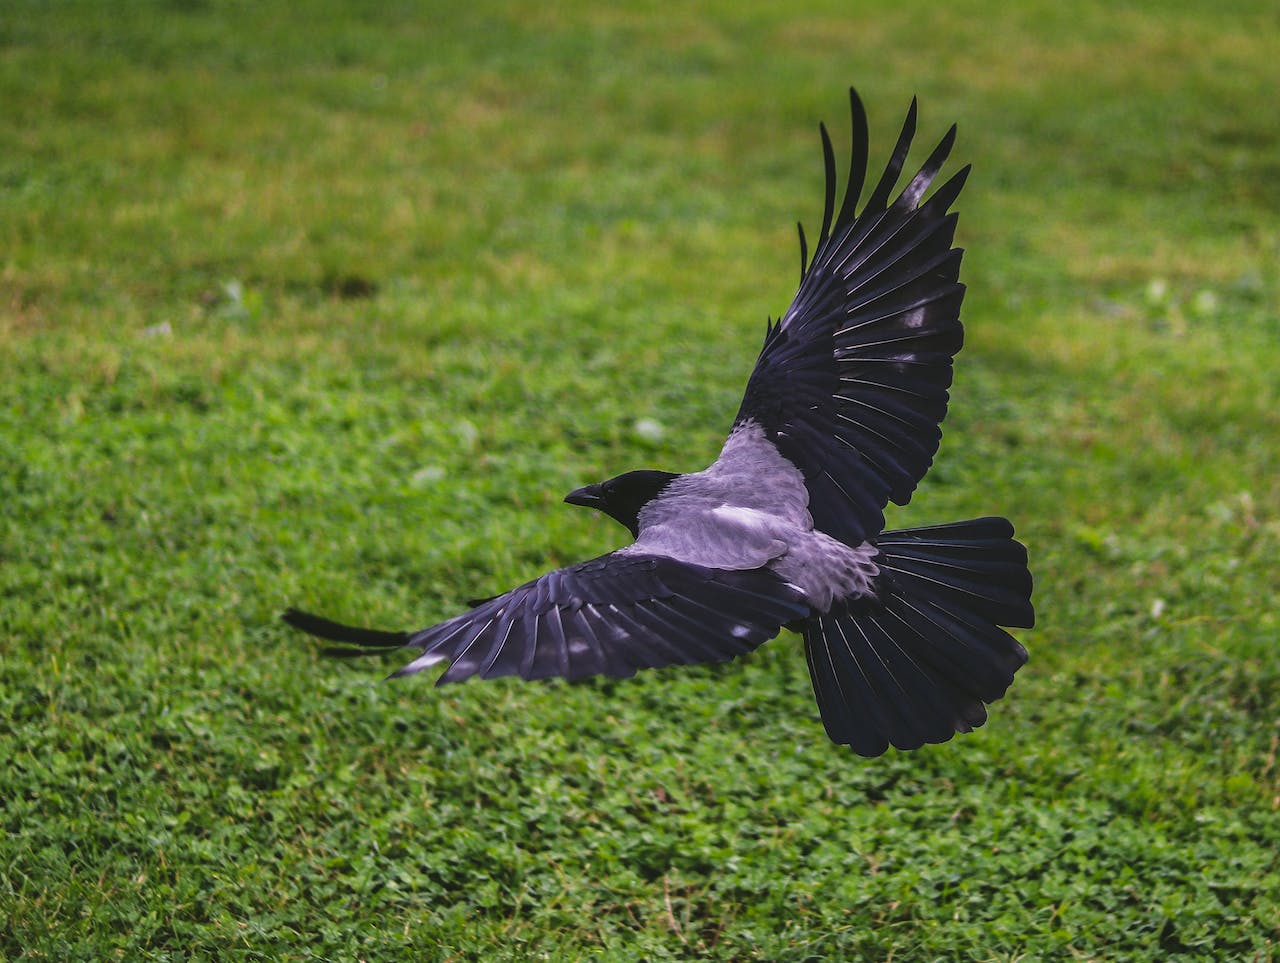 What Do Crows Symbolize In The Bible?